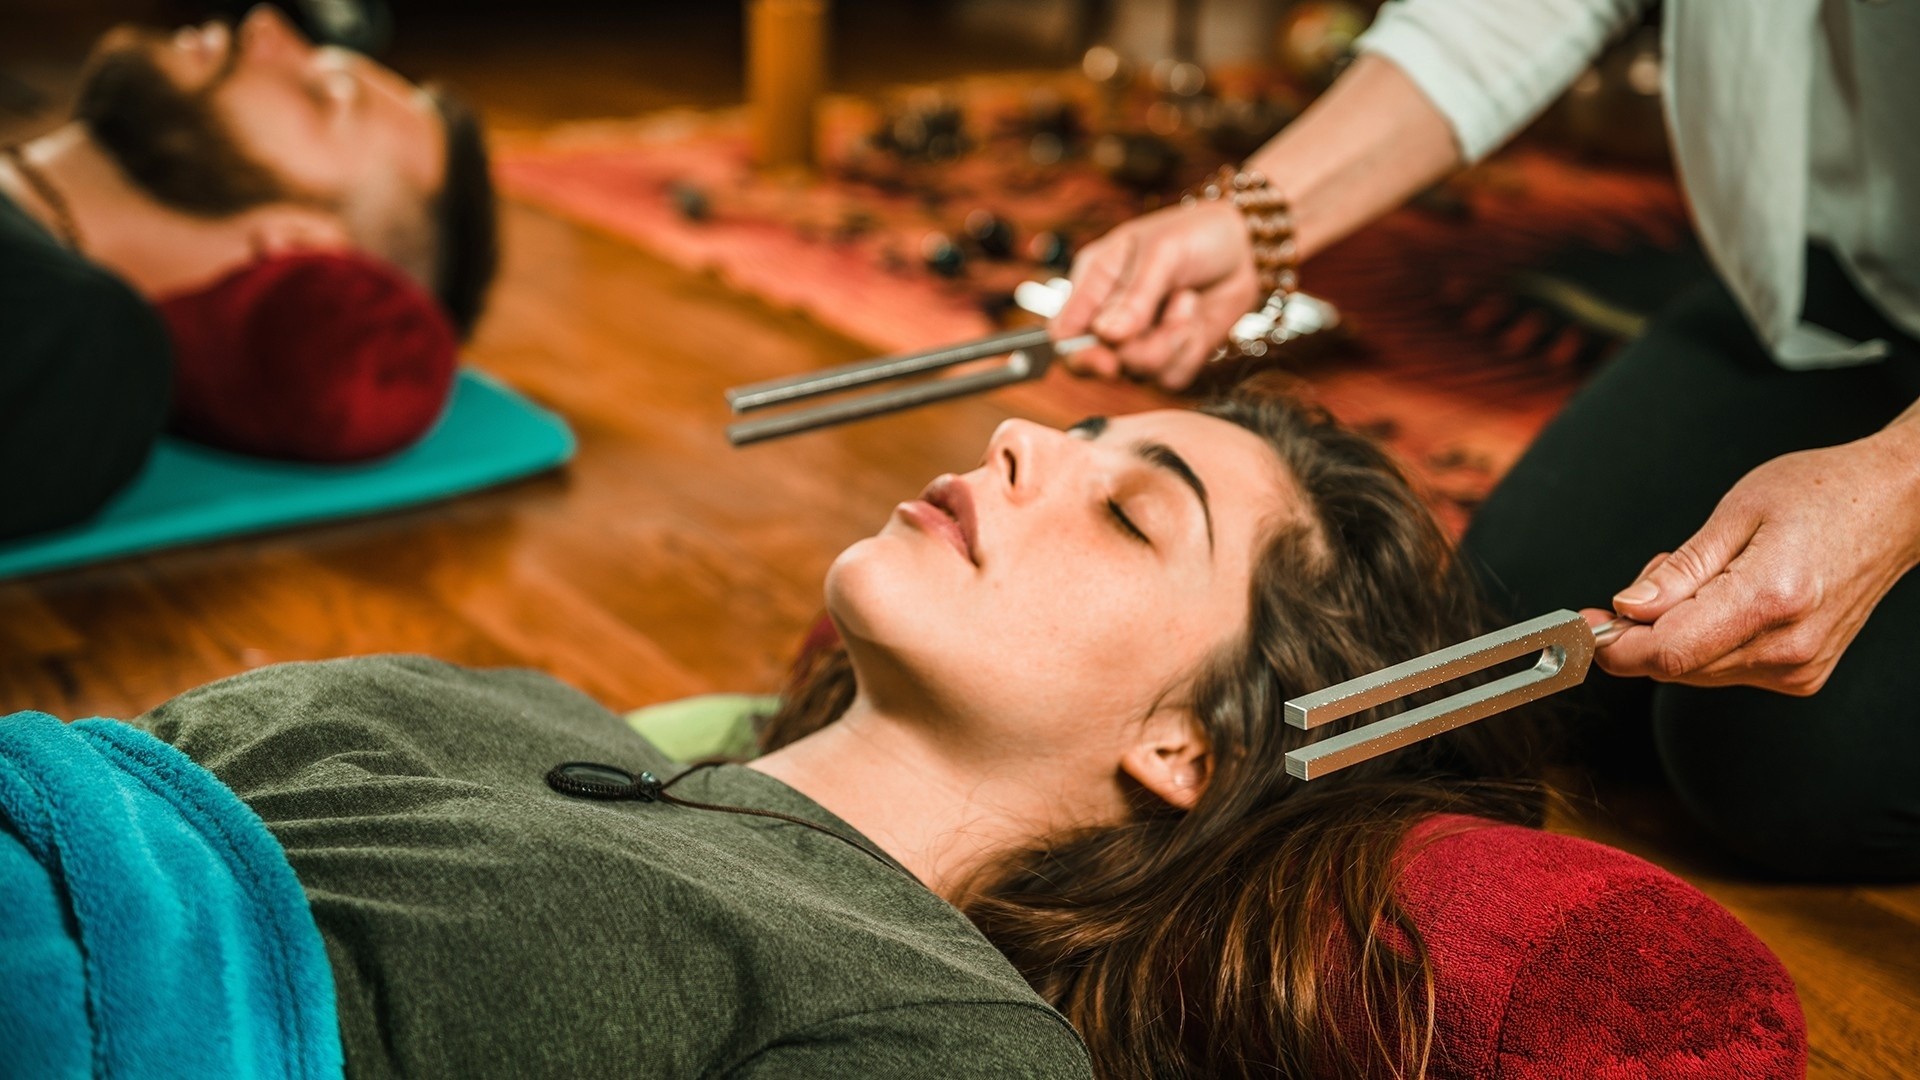 ST. LOUIS, MISSOURI - Sound Healing with Tuning Forks